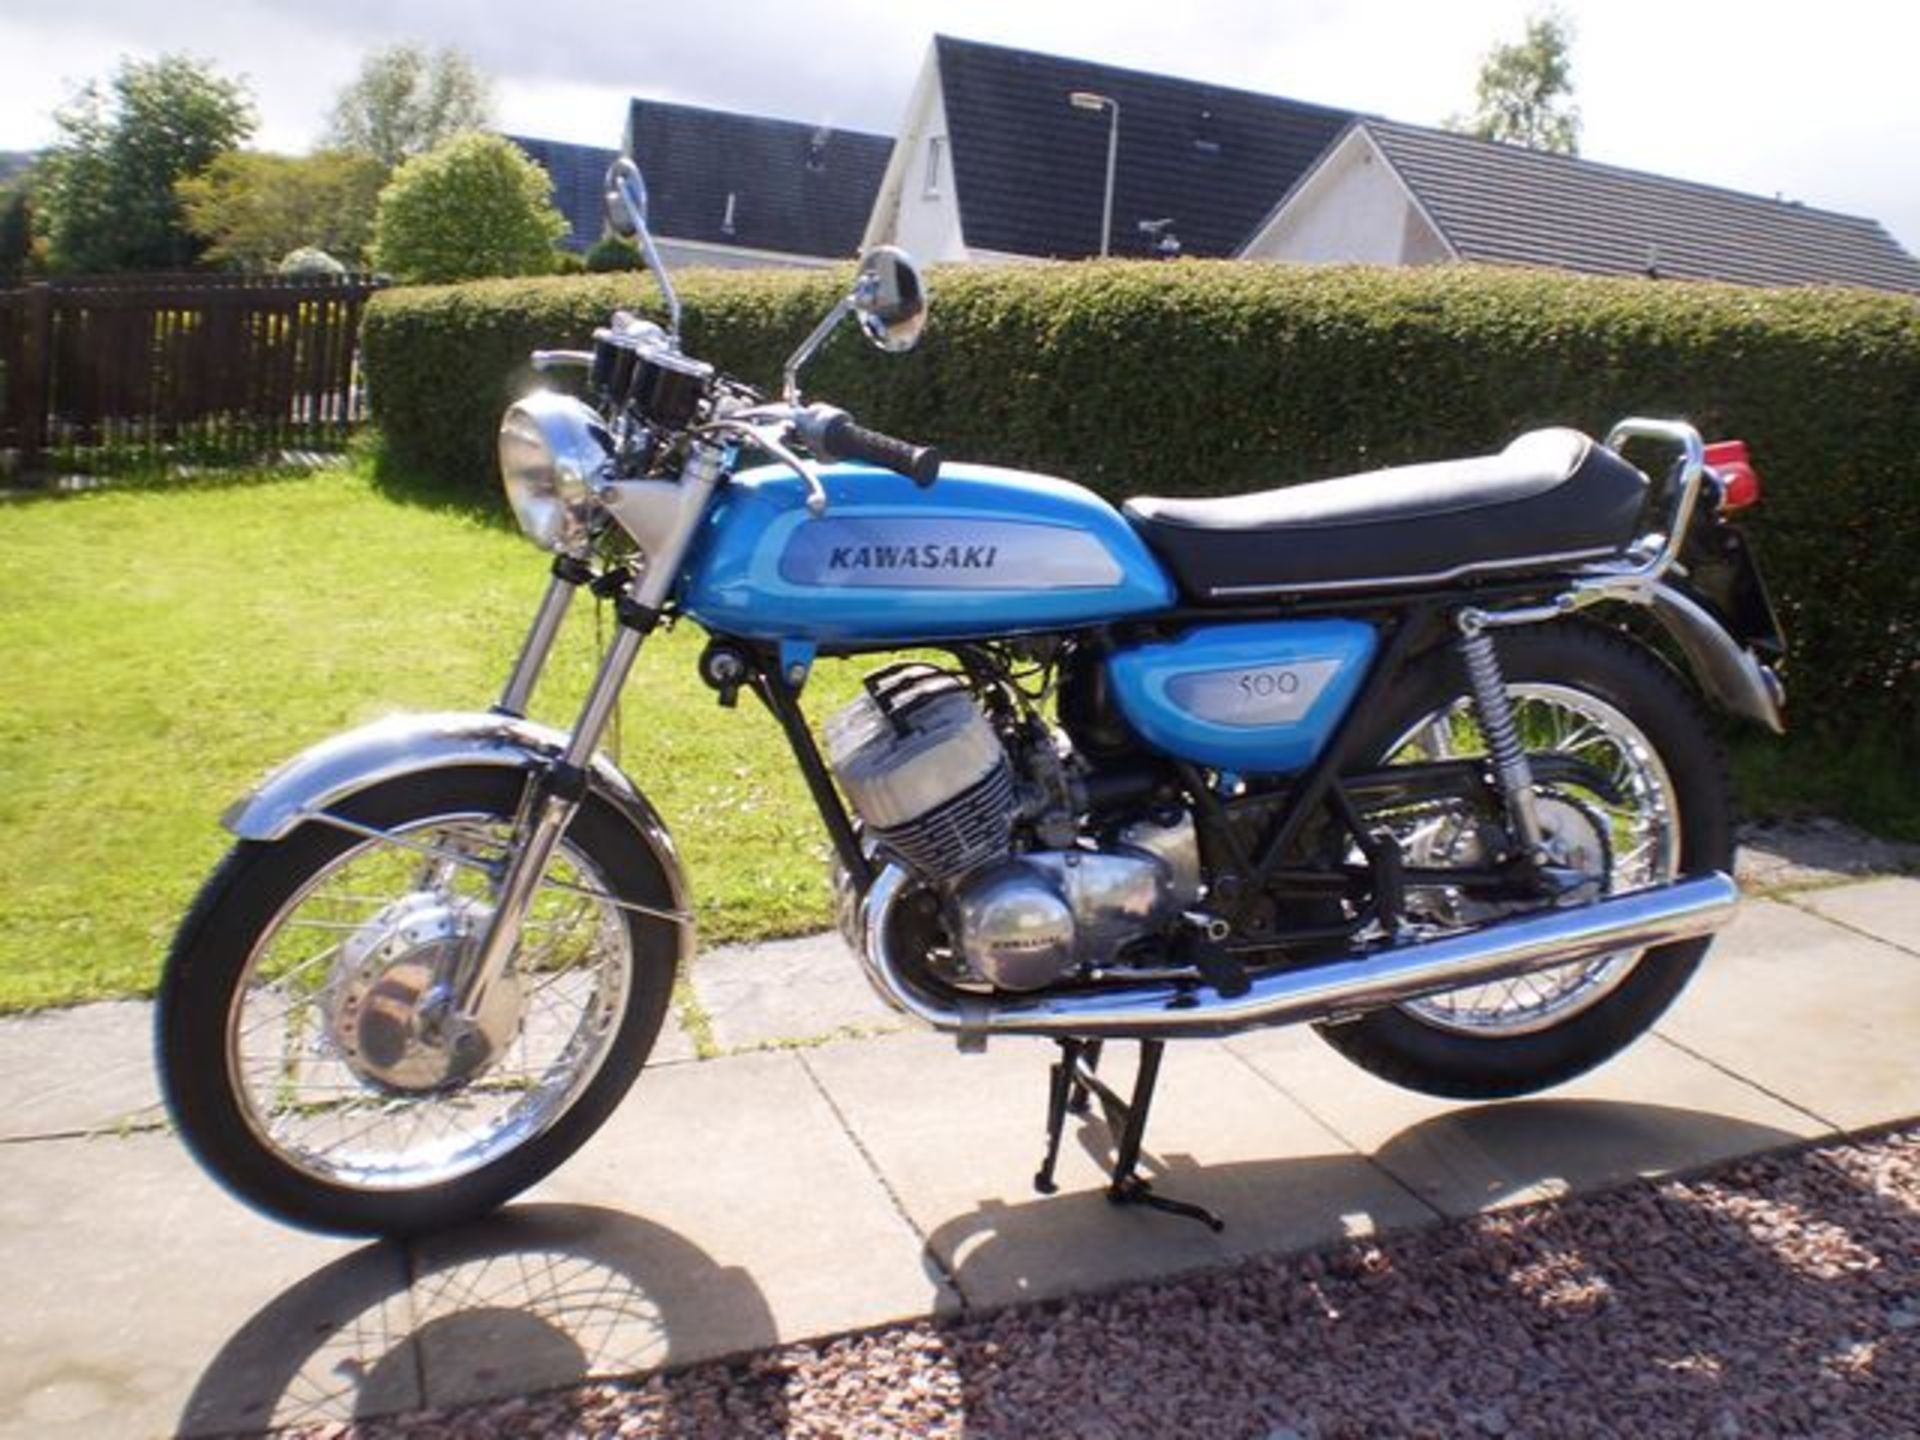 KAWASAKI, H1 - 500cc, Chassis number 33745 - the vendor states that this example is a genuine UK - Image 2 of 2